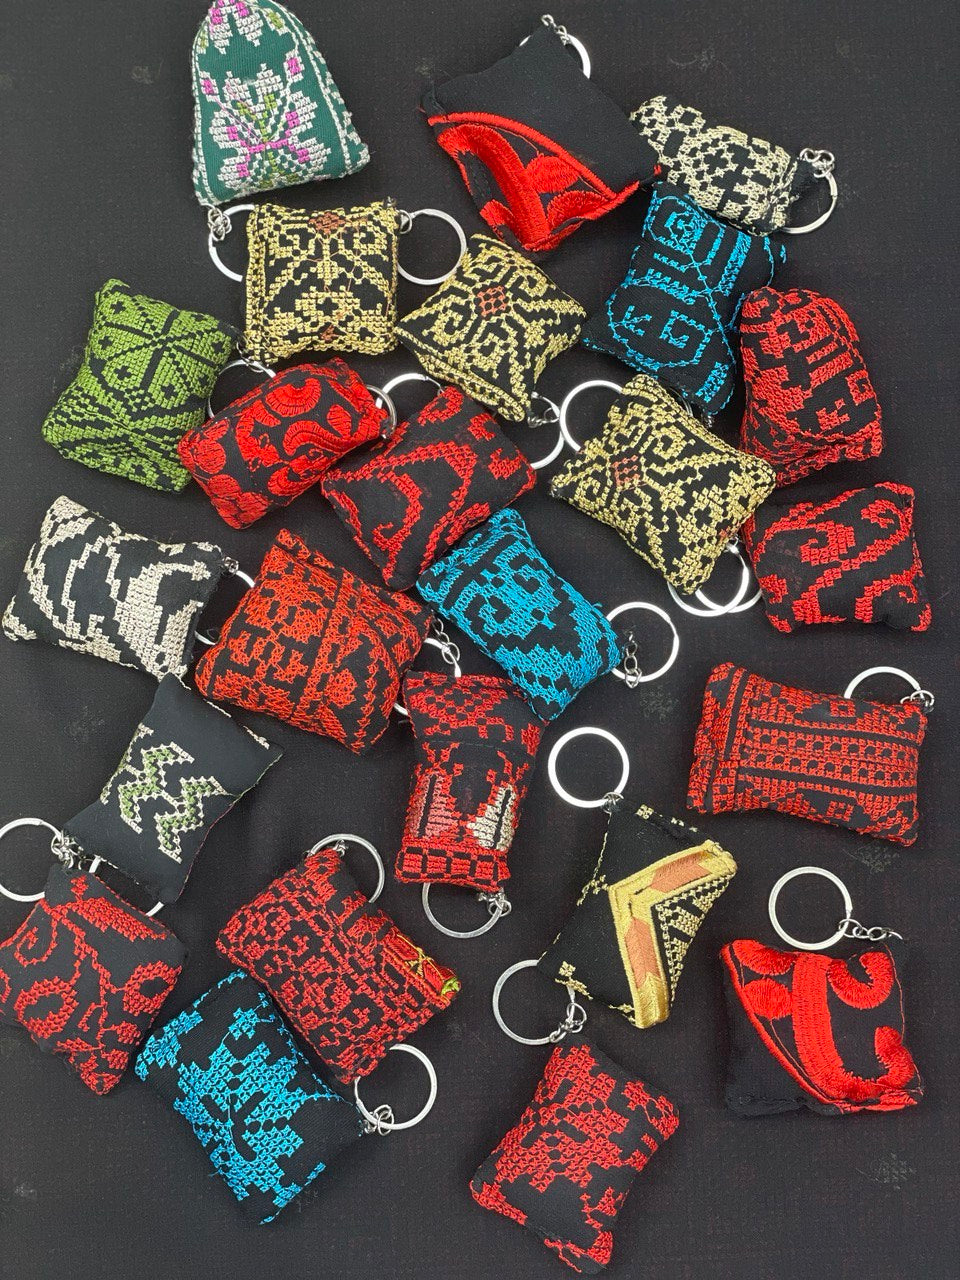 High-Quality Tatreez Keychain Accessories: A Touch of Palestinian Cultural Heritage